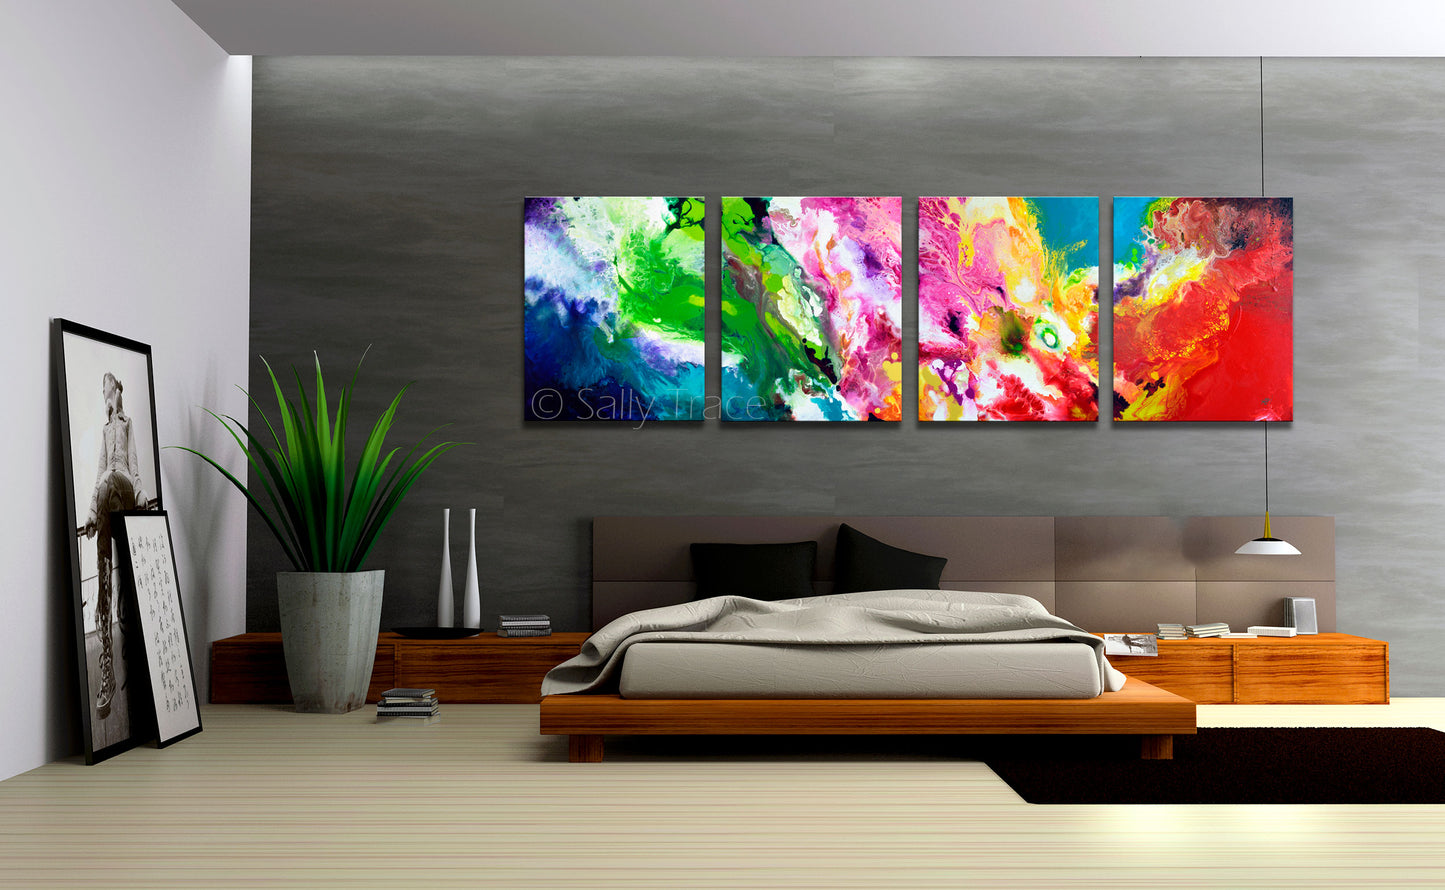 Clean Sweep, colorful polyptych multi panel four canvas abstract painting print by Sally Trace, room view, living room modern living room wall art painting.